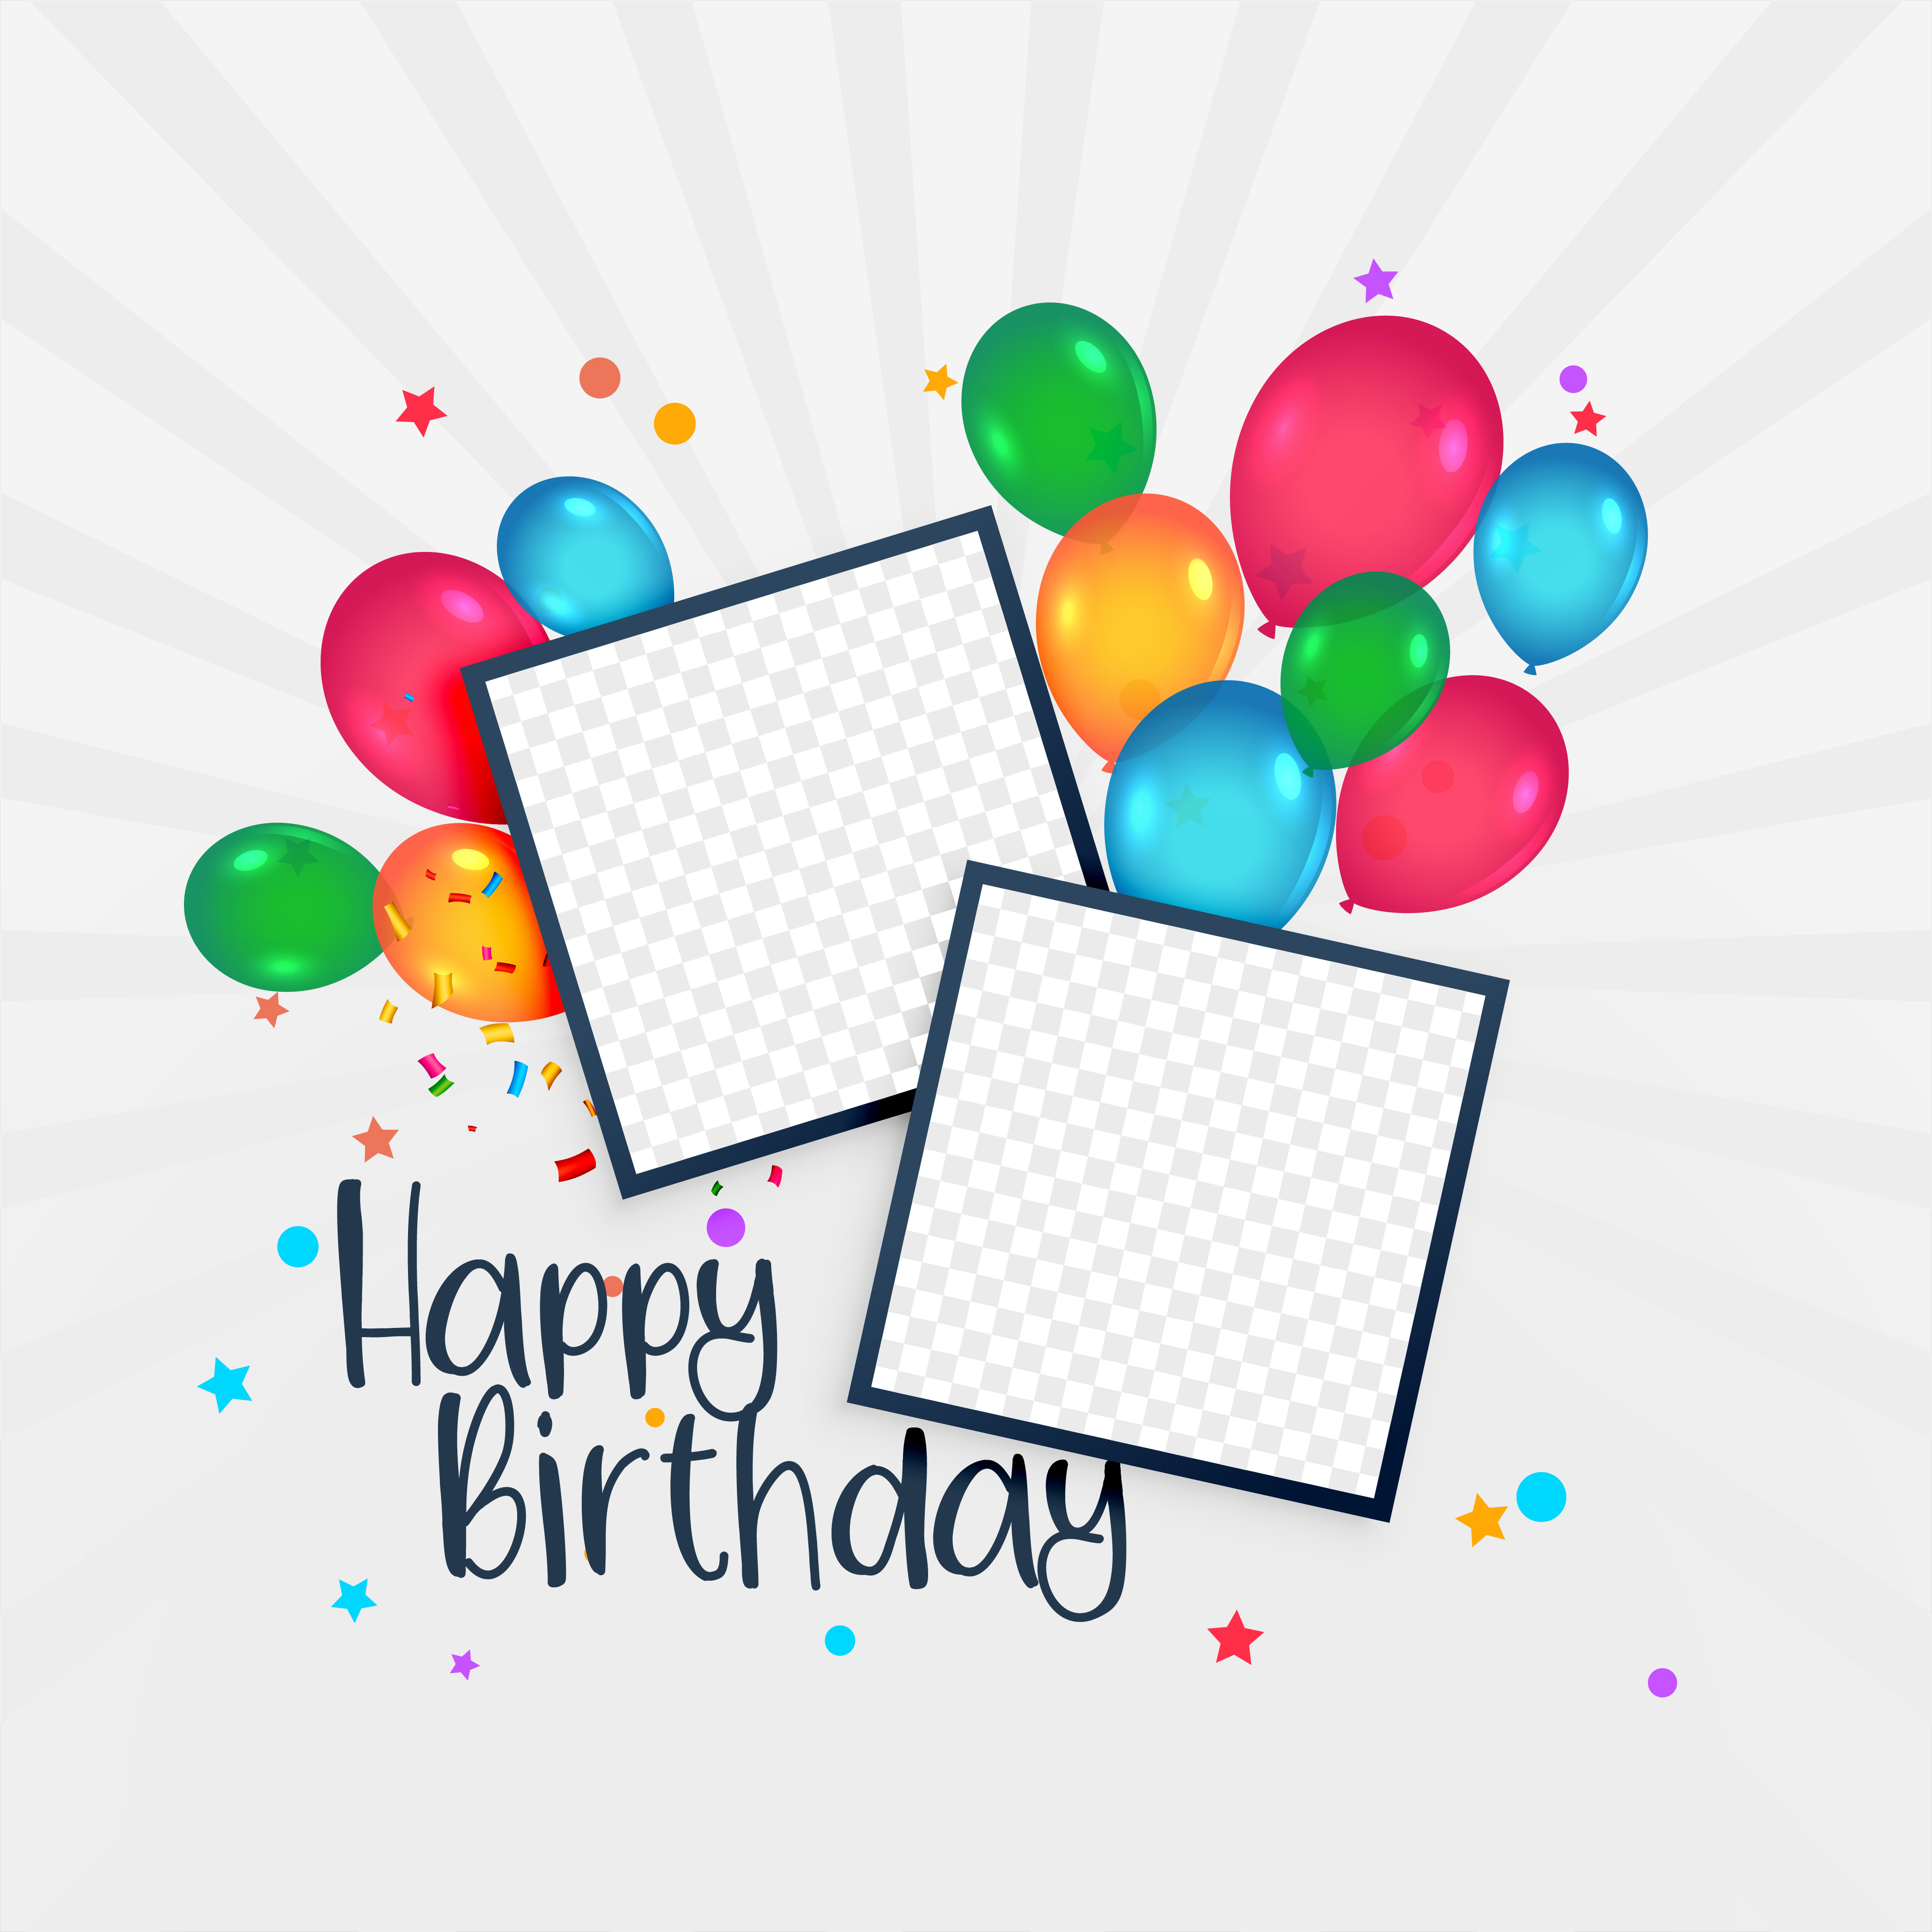 happy birthday card with photo frame and balloons - Download Free ...